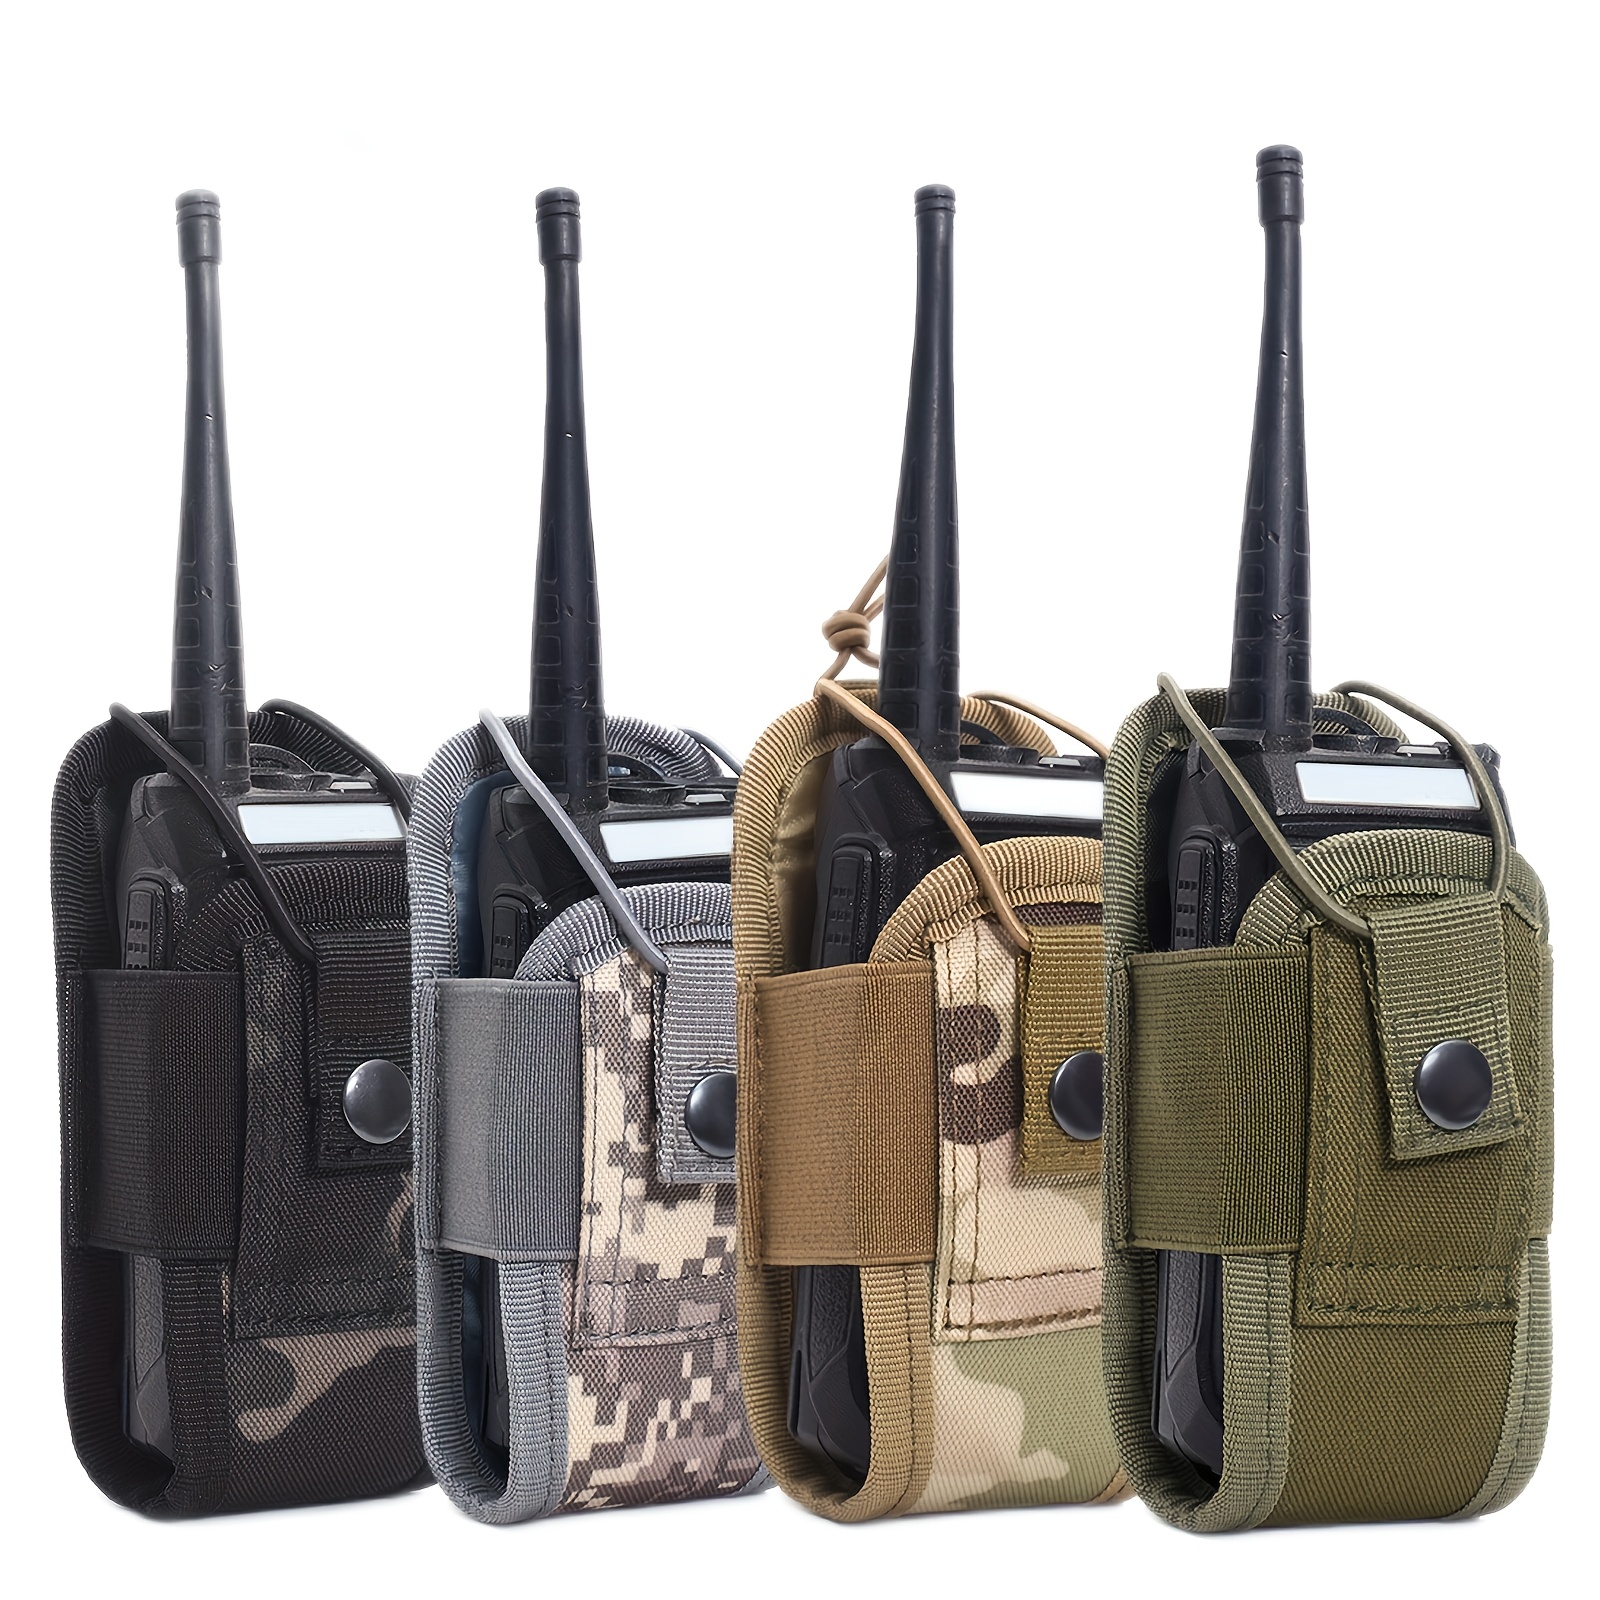 Tactical Molle Radio Walkie Talkie Pouch Waist Bag Holder Pocket Holster  Outdoor